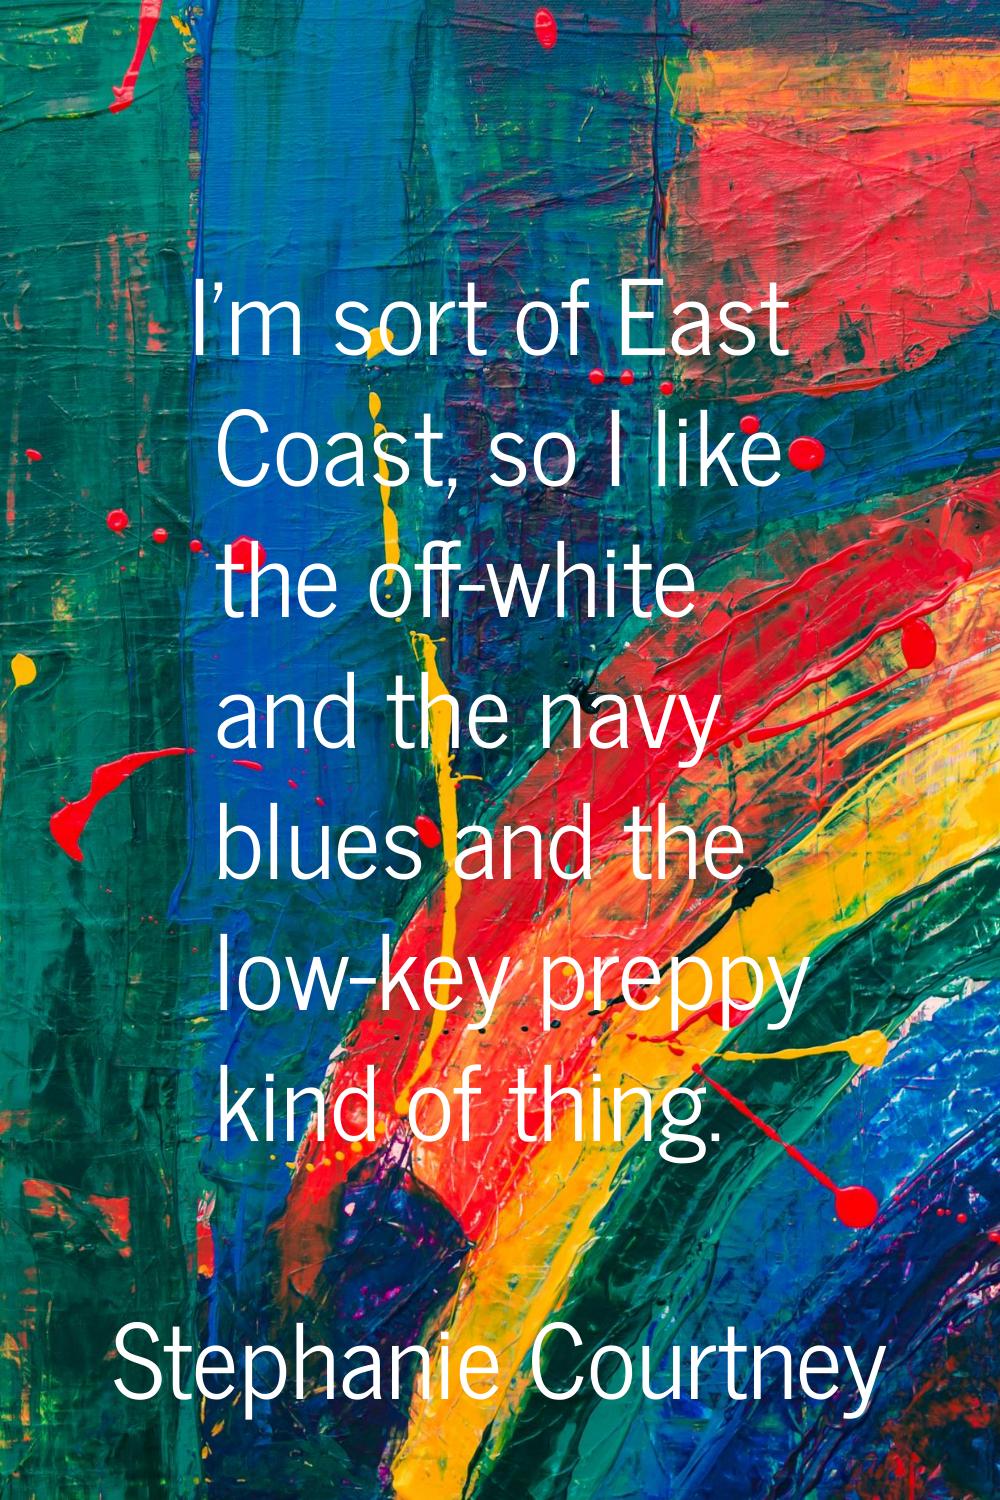 I'm sort of East Coast, so I like the off-white and the navy blues and the low-key preppy kind of t